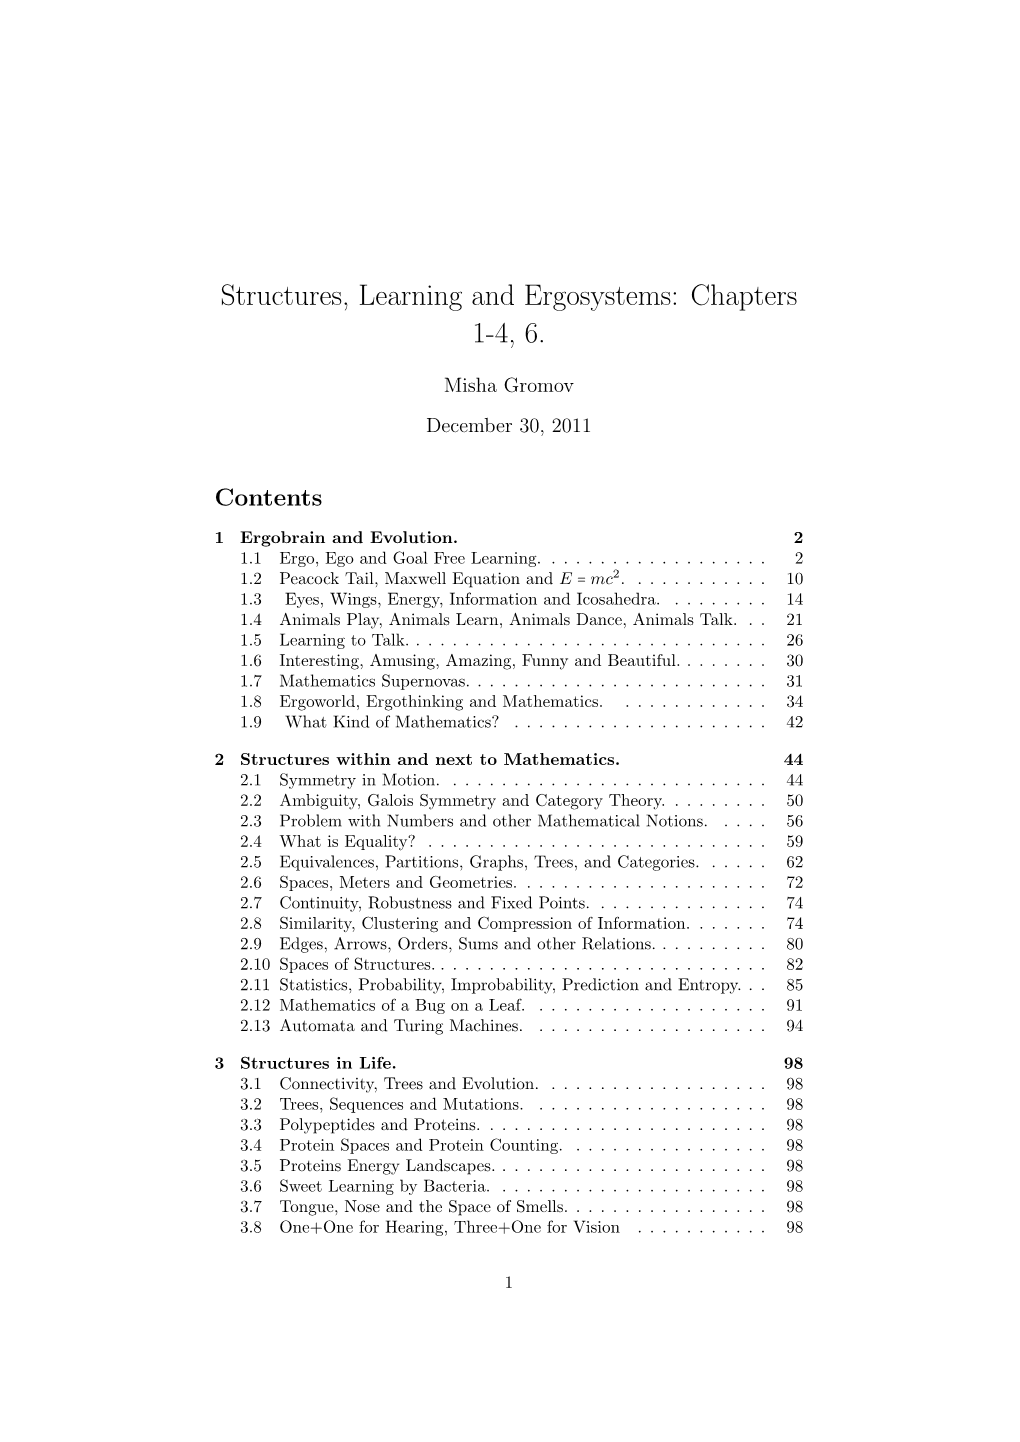 Structures, Learning and Ergosystems: Chapters 1-4, 6